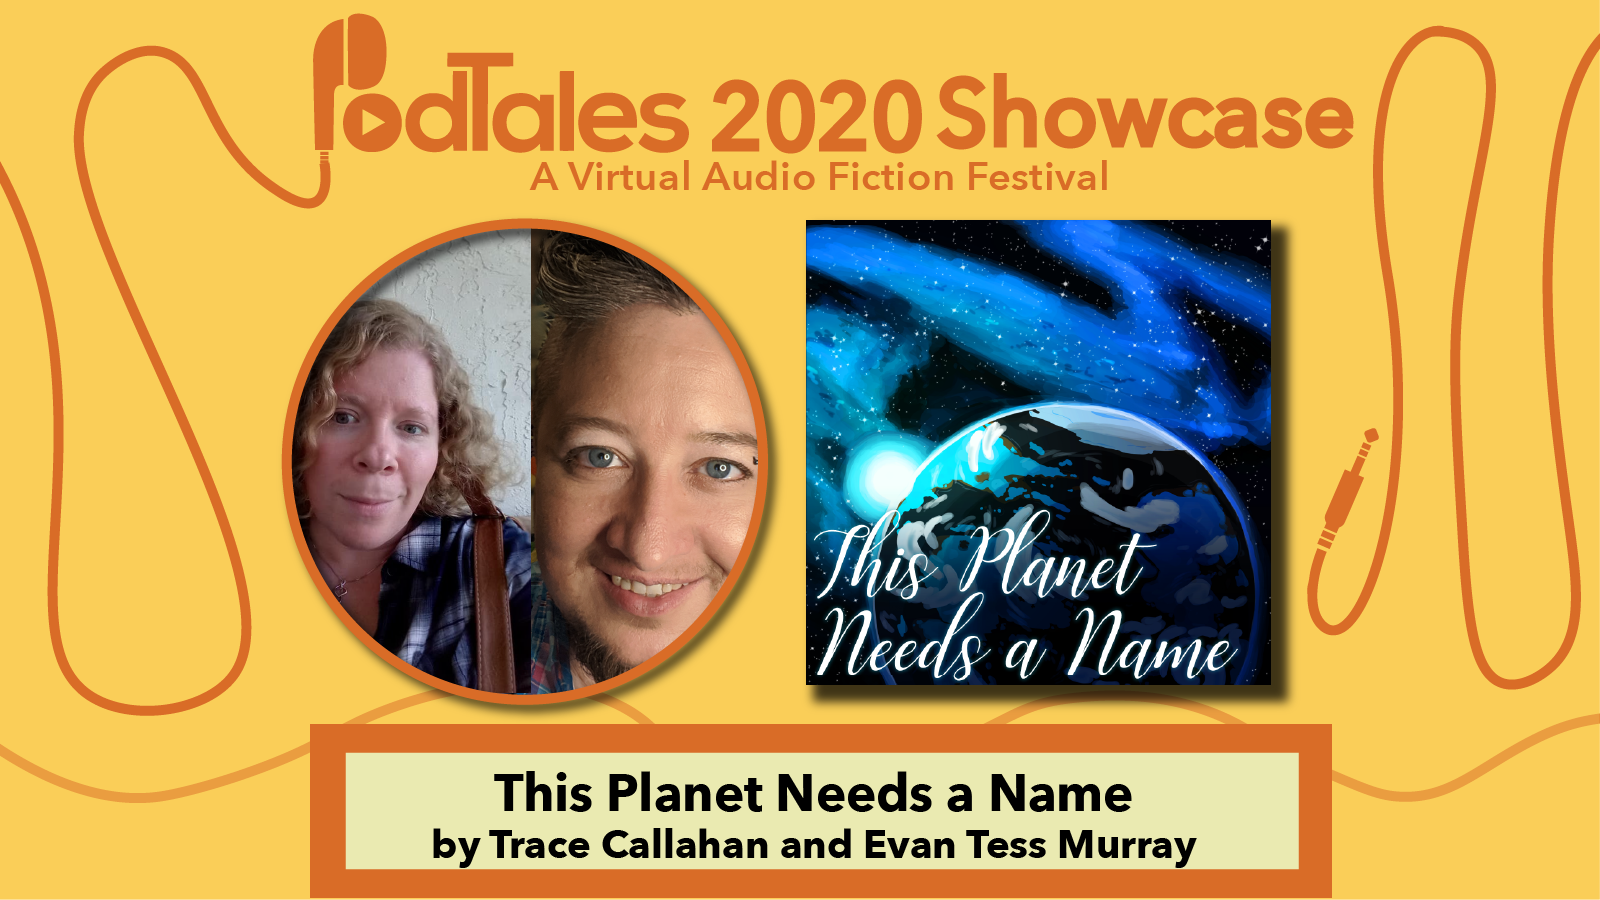 Text reading “PodTales 2020 Showcase: A Virtual Audio Fiction Festival”, Photo of Trace Callahan and Evan Tess Murray, Show Art for This Planet Needs a Name, Text reading “This Planet Needs a Name by Trace Callahan and Evan Tess Murray”